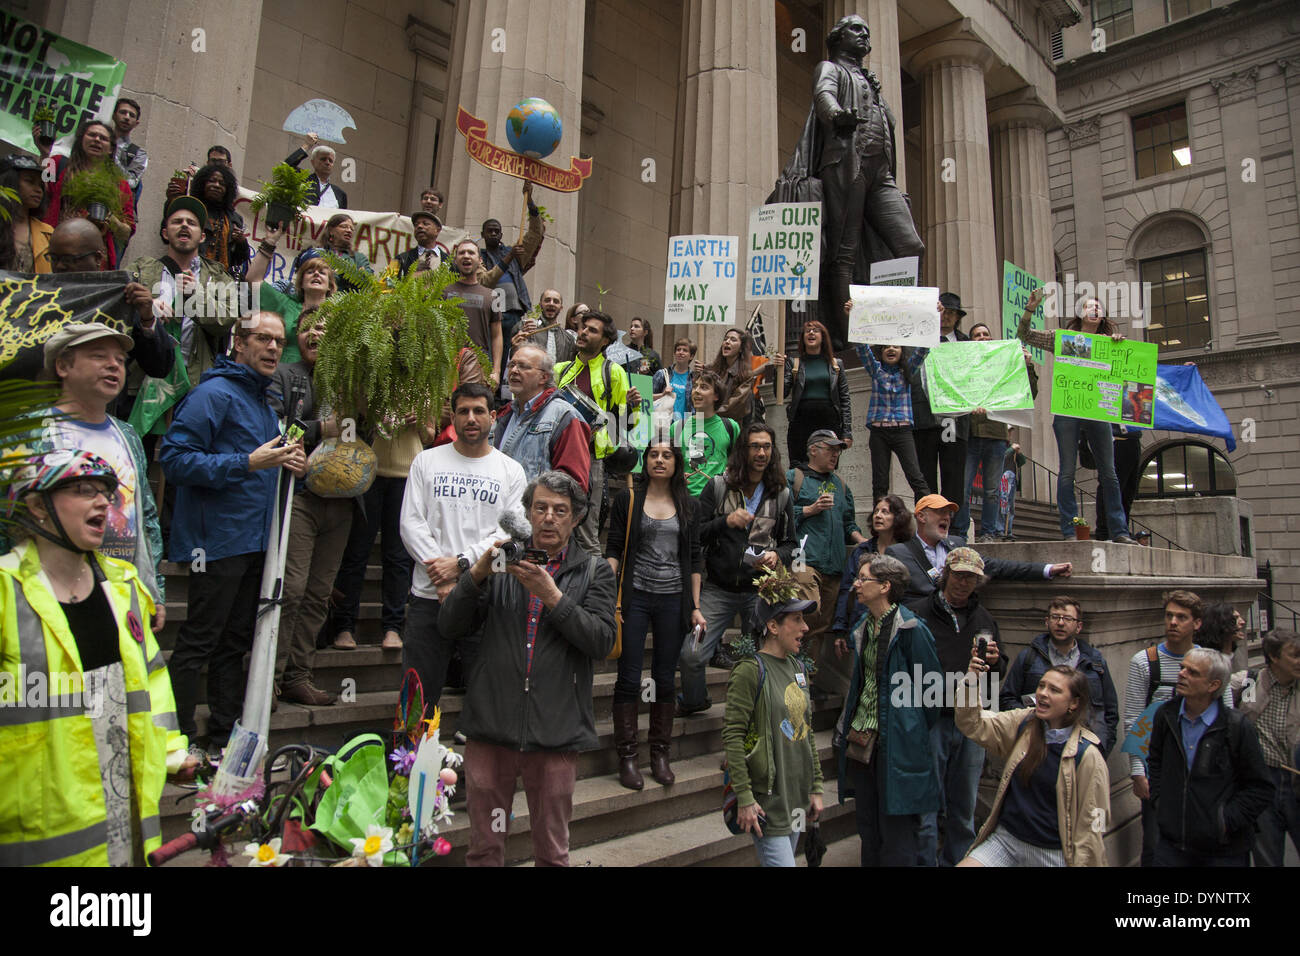 New York, NY, USA , 22nd Apr, 2014. Environmental activists rally on Earth Day at Zuccotti Park, then march to Wall Street calling for system change not climate change. The Occupy movement is still around in NYC it seems. Credit:  David Grossman/Alamy Live News Stock Photo